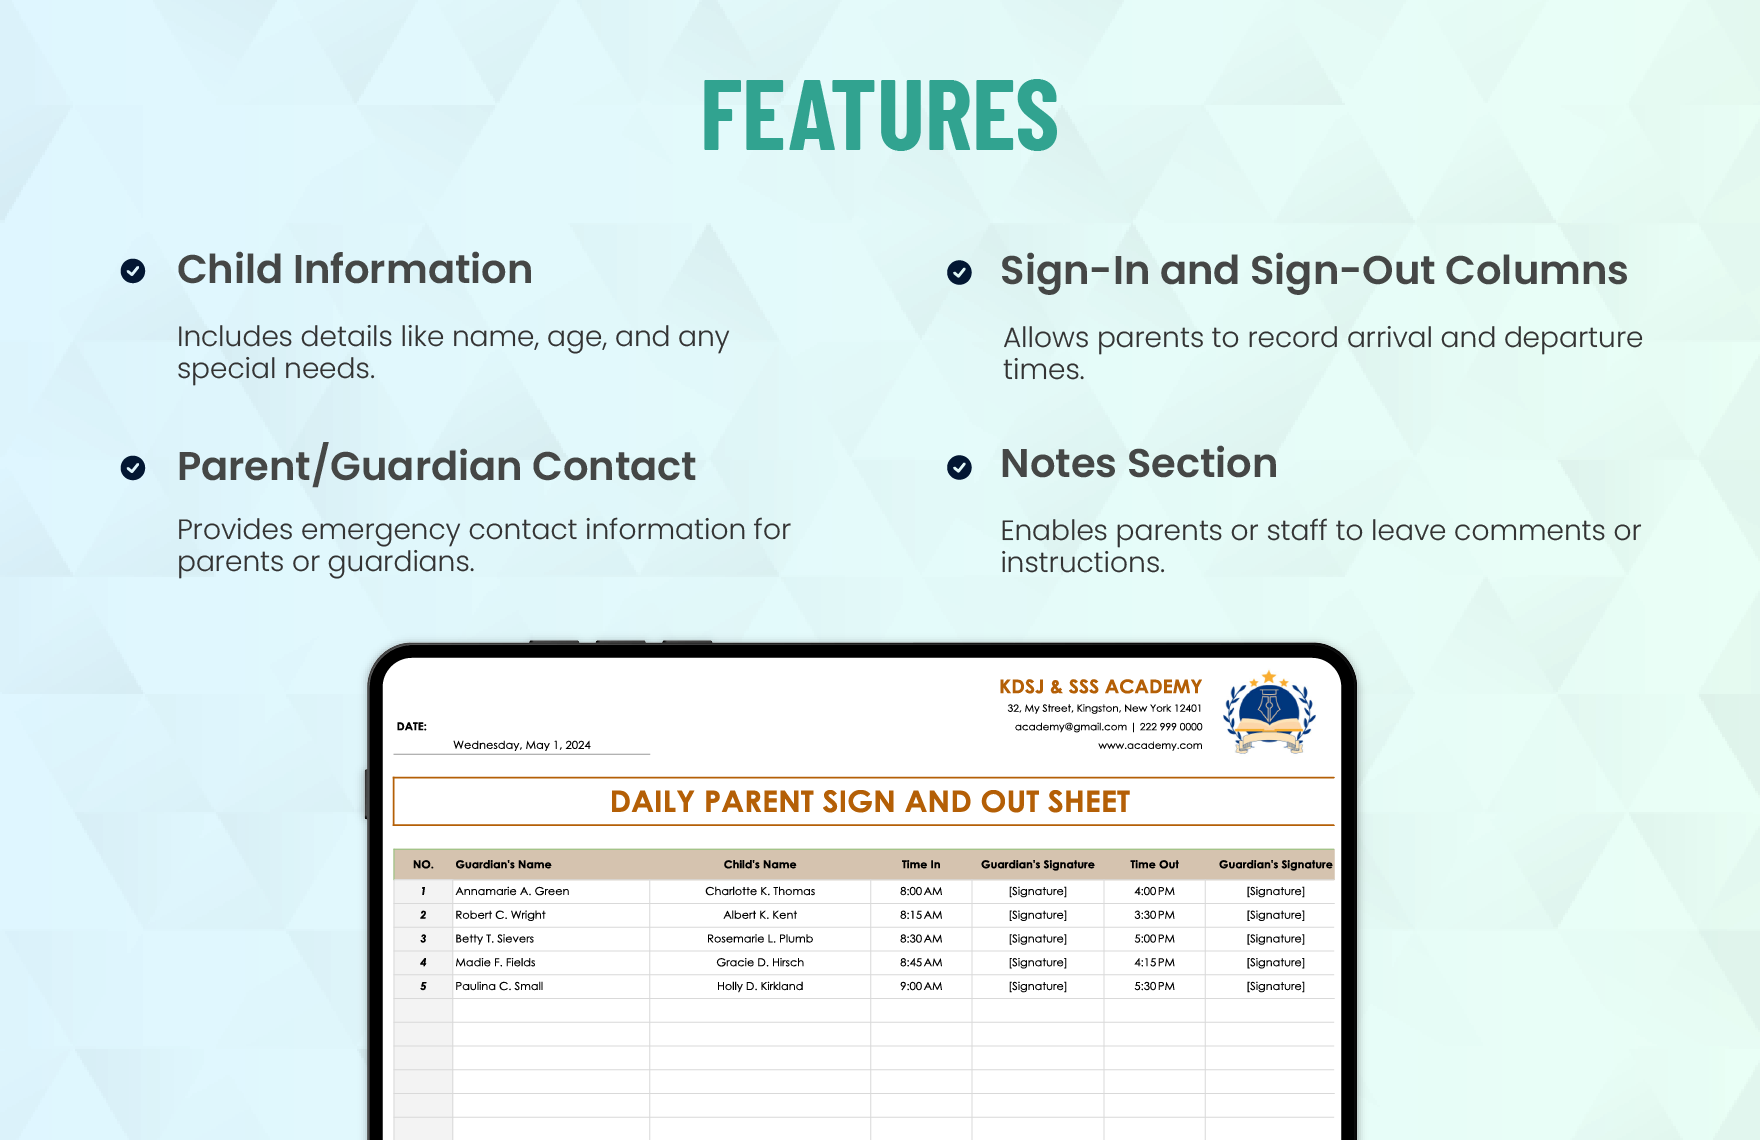 Daily Parent Sign in Sign Out Sheet Template